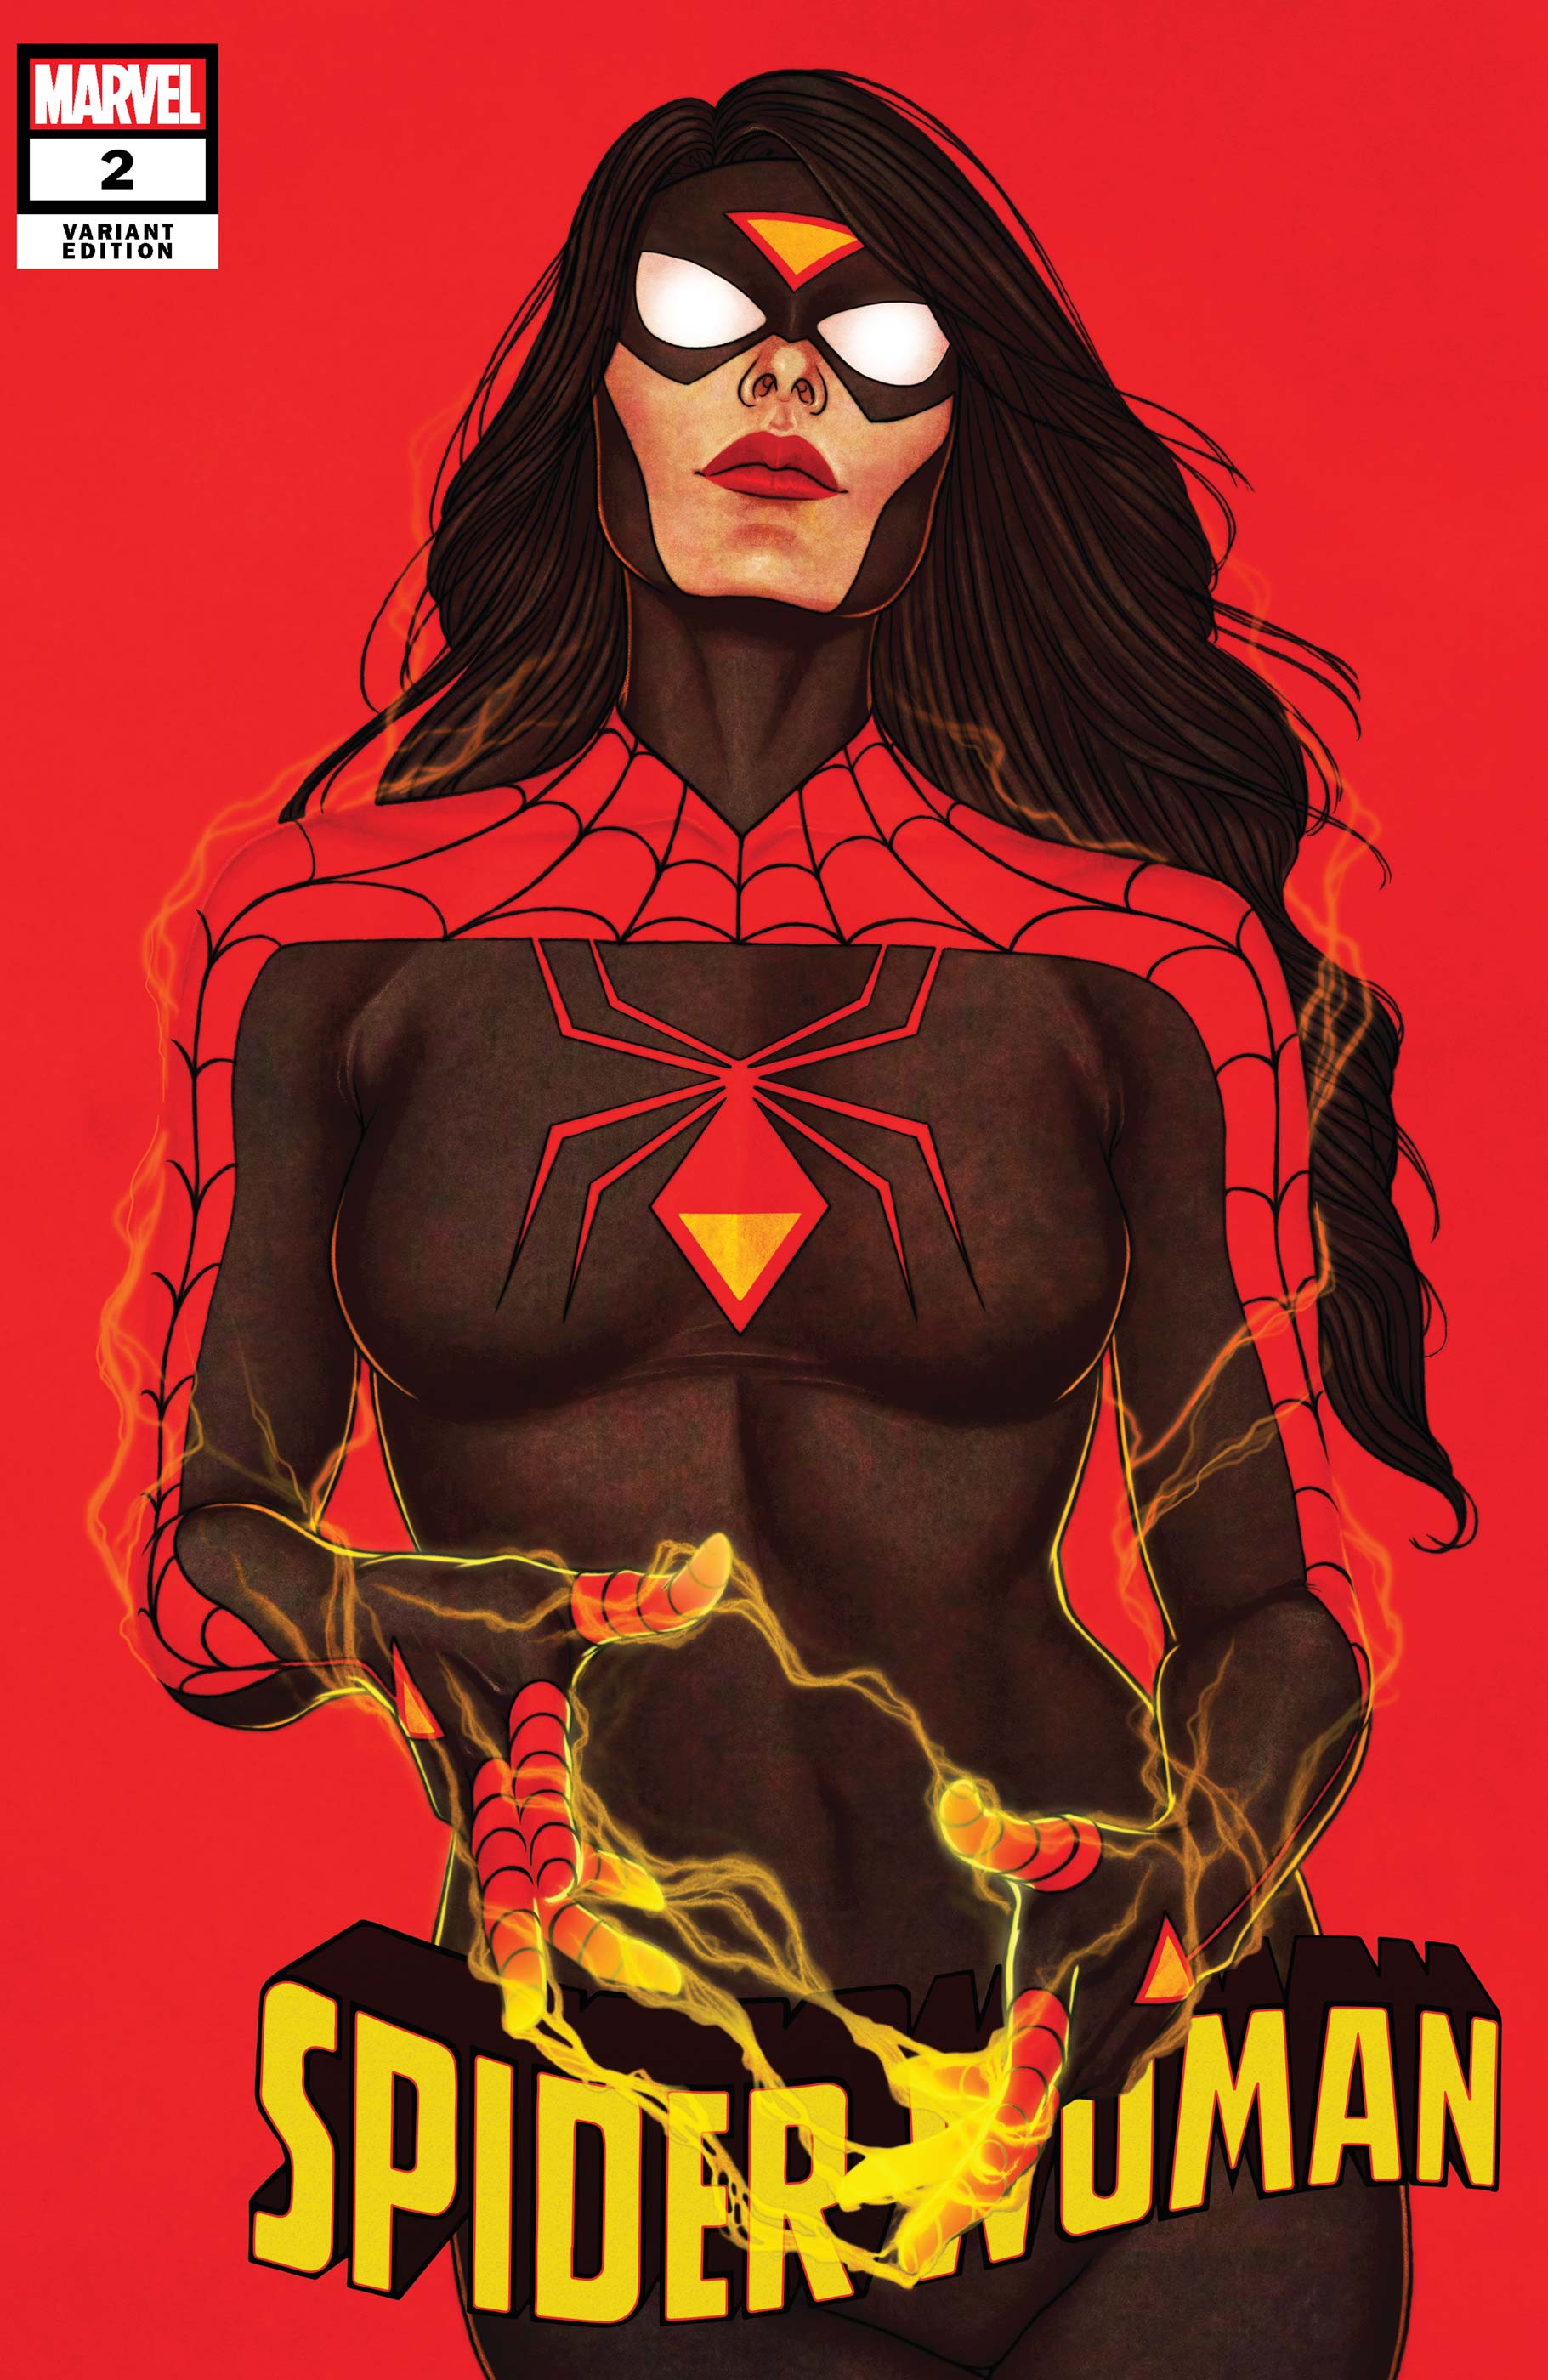 Spider-Woman (2020) #2 (Variant)